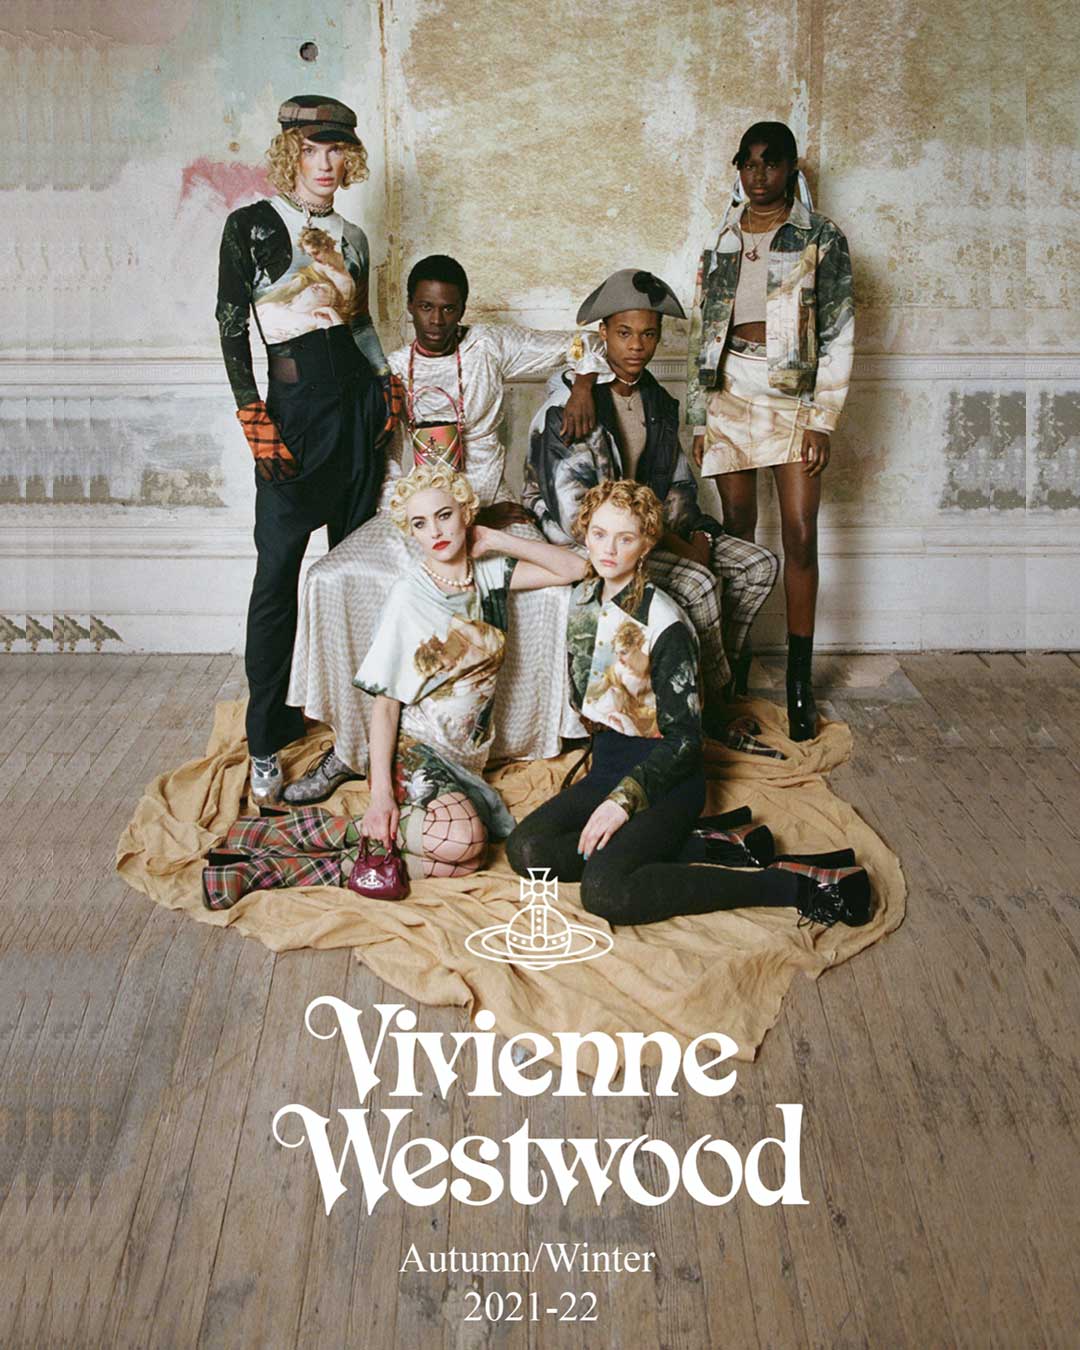 VIVIENNE WESTWOOD AW 21/22 - Reserved Magazine